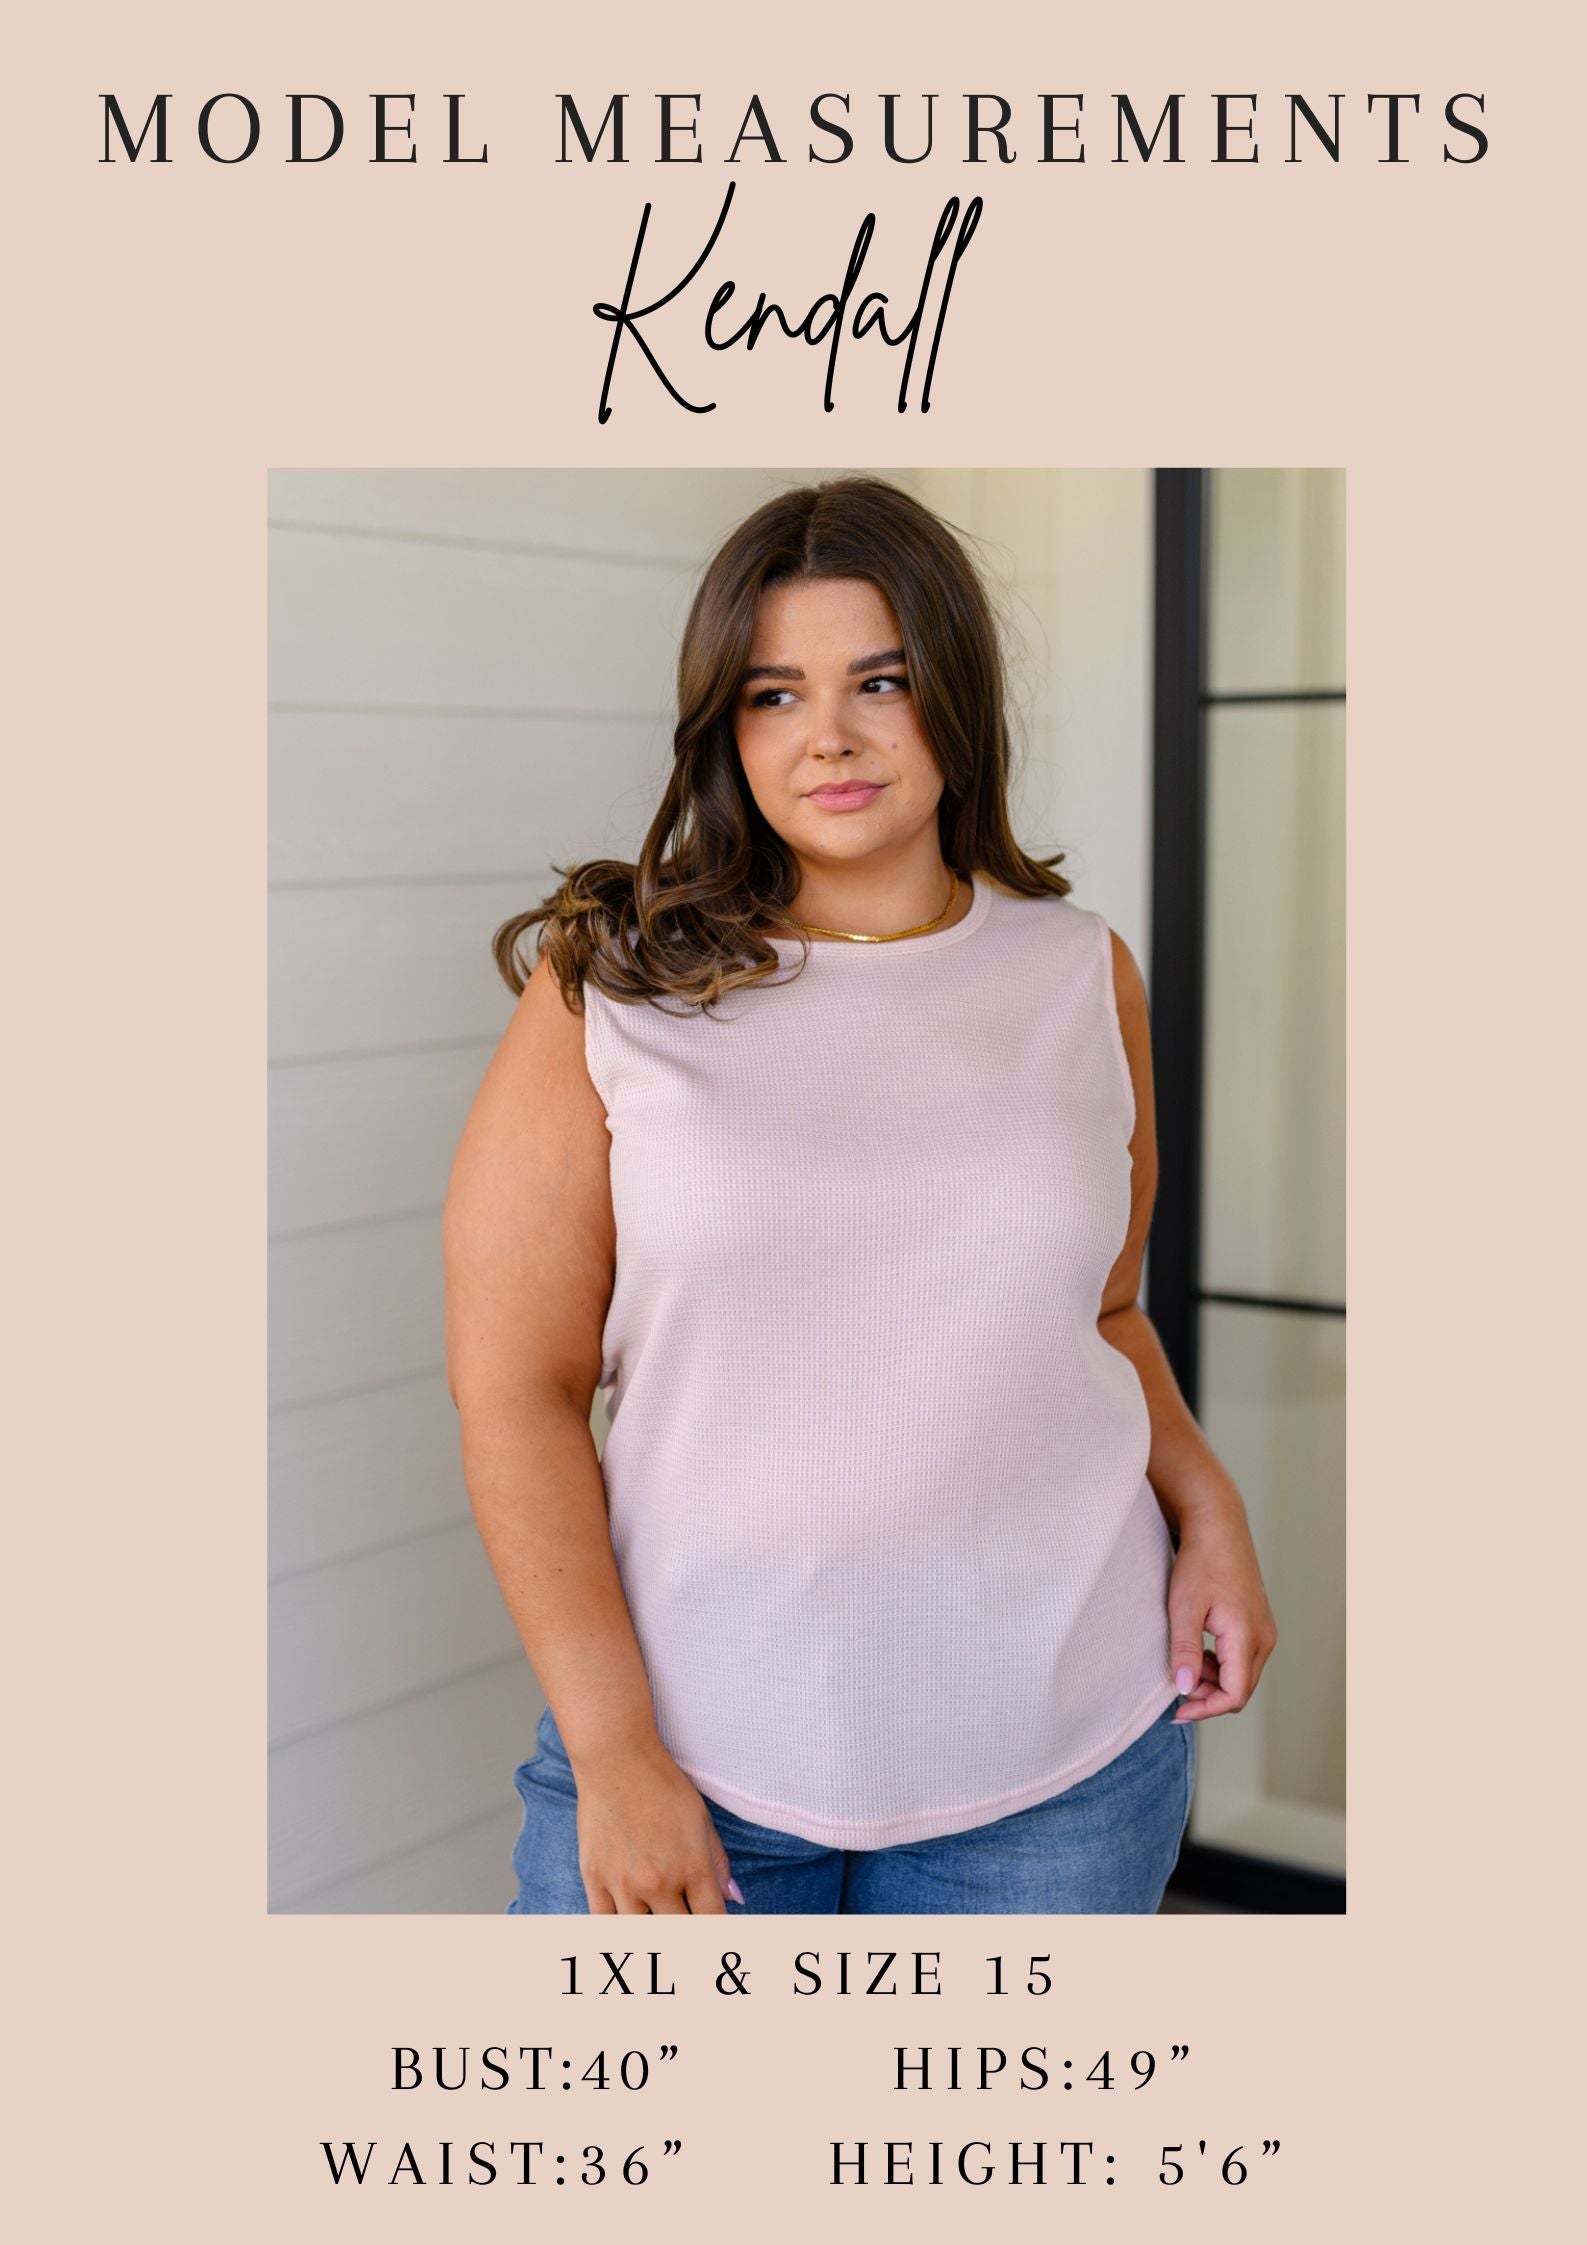 Casually Cute V-Neck Top in Magenta Womens Ave Shops   